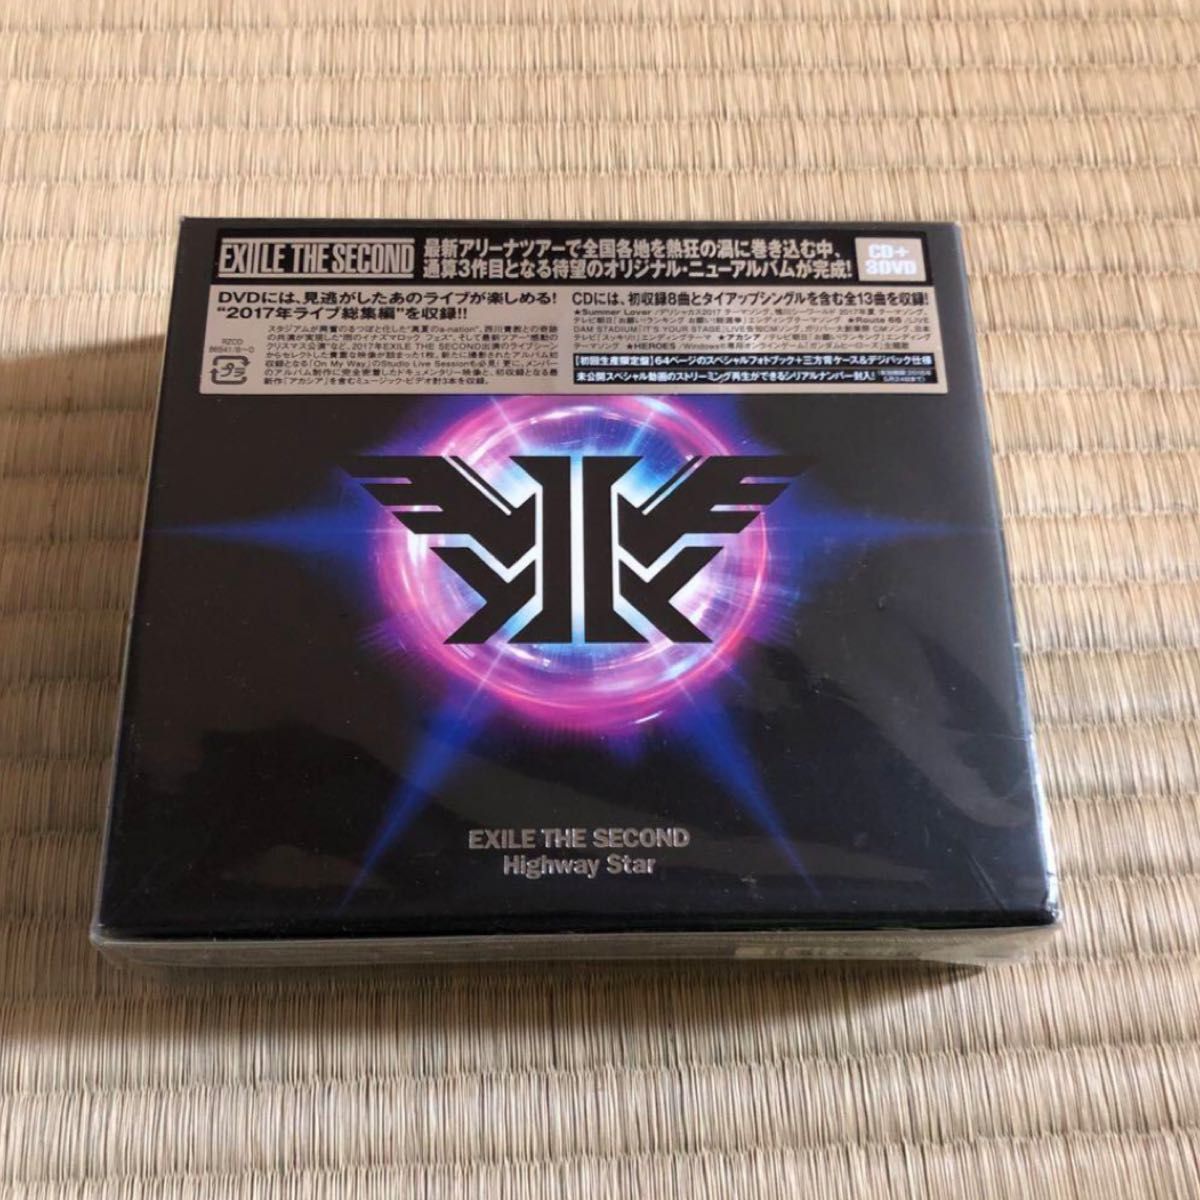 Highway Star／EXILE THE SECOND 初回生産限定盤